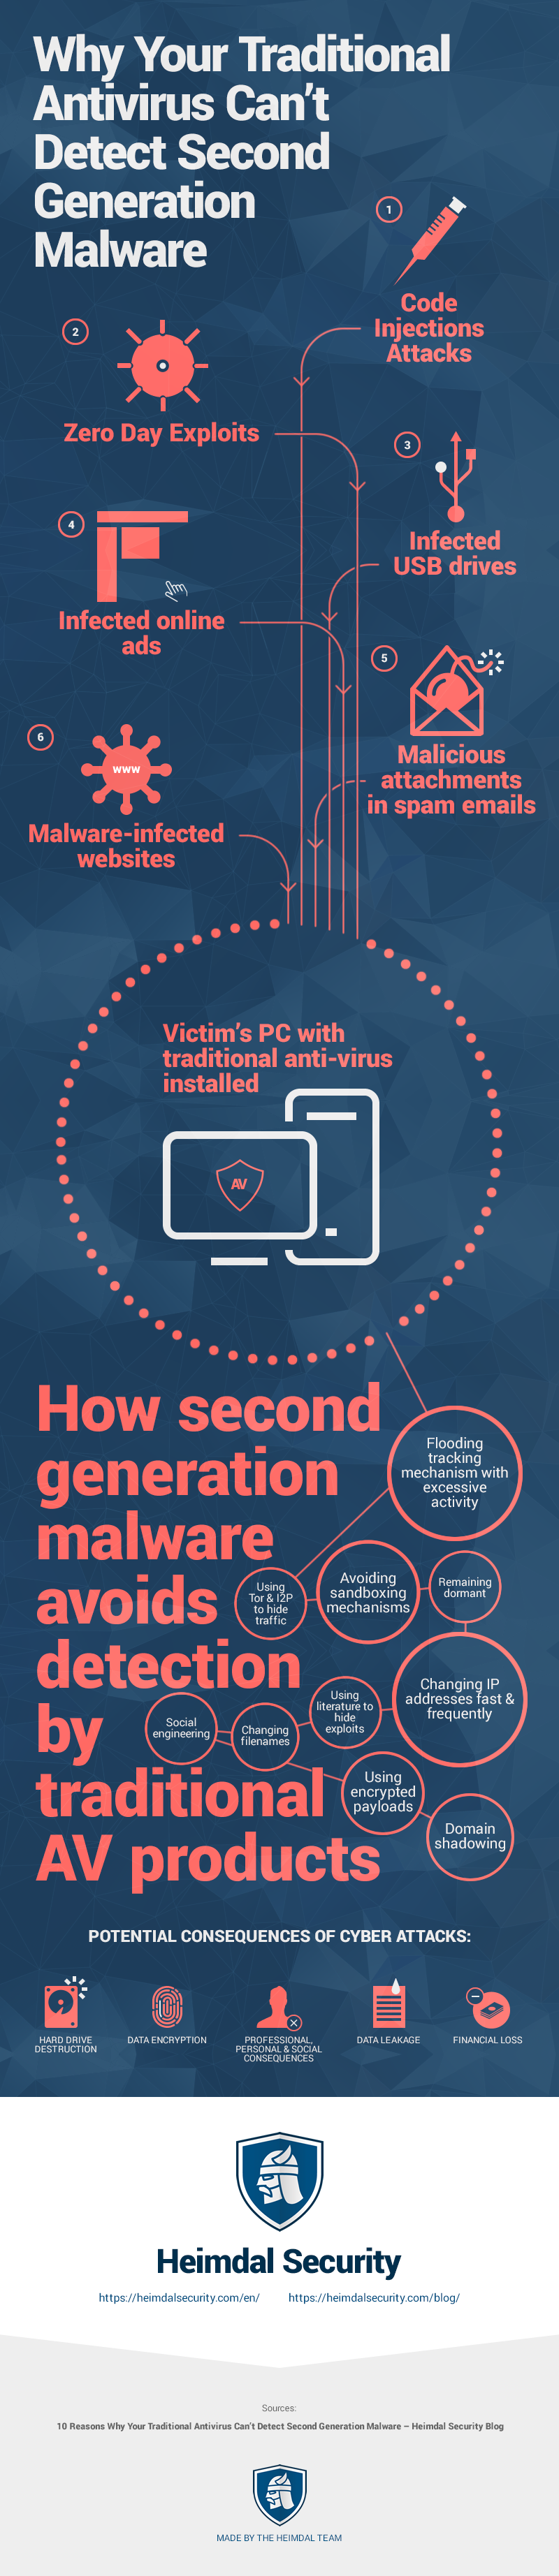 Why Your Traditional Antivirus Can’t Detect Second Generation Malware